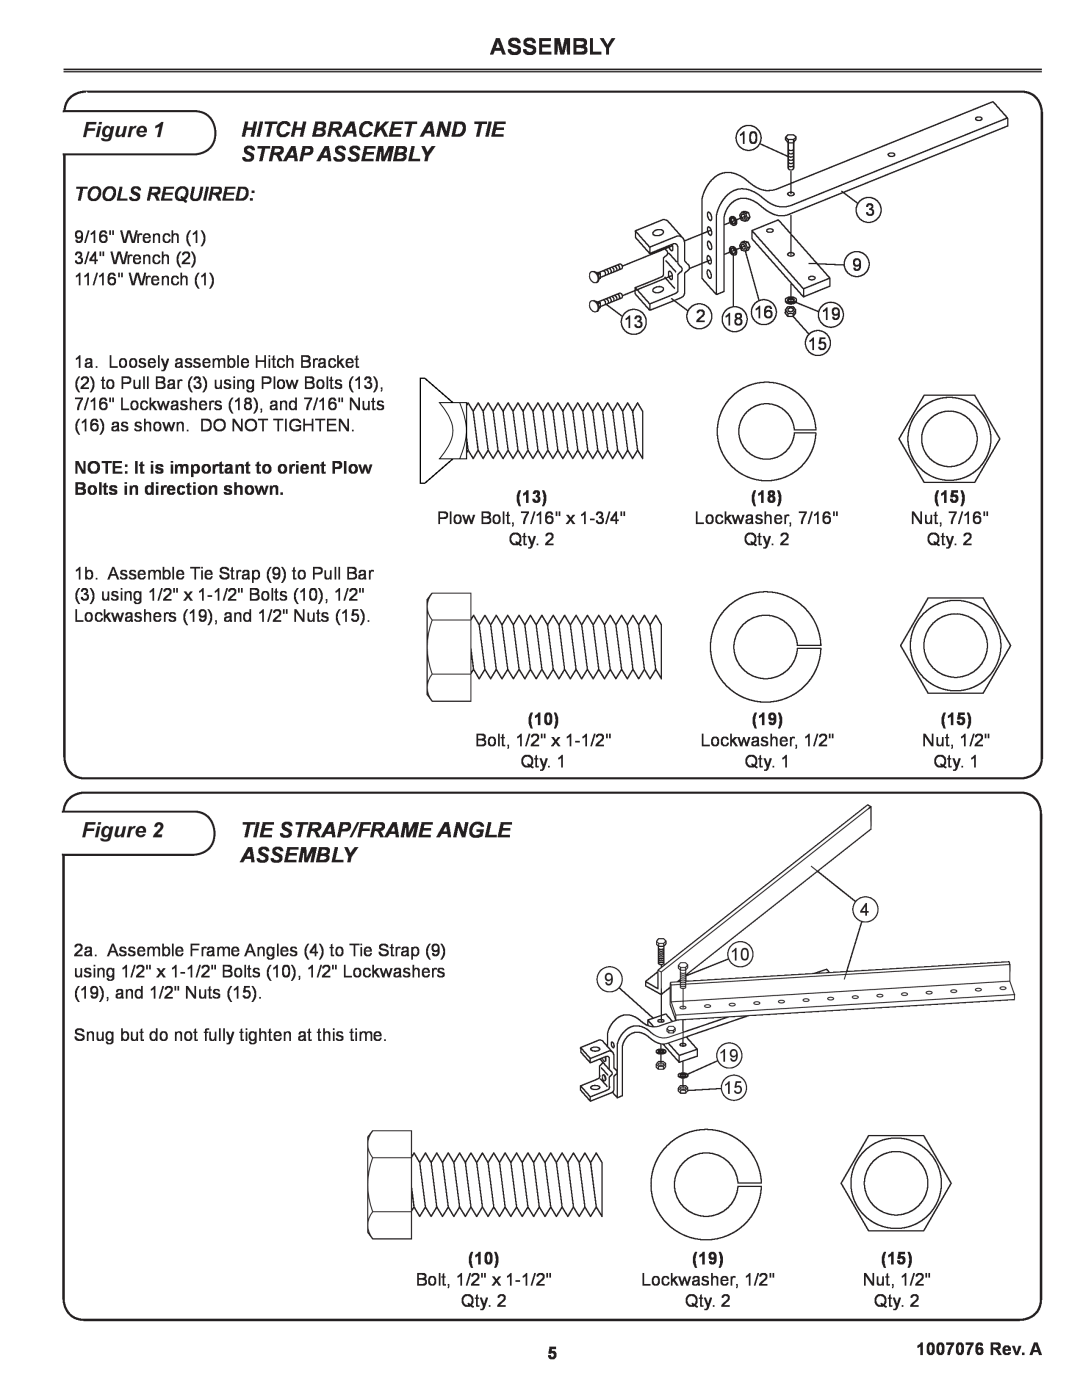 Sears CC-560 Hitch Bracket And Tie, Strap Assembly, Tie Strap/Frame Angle Assembly, Tools Required, Lockwasher, 7/16 